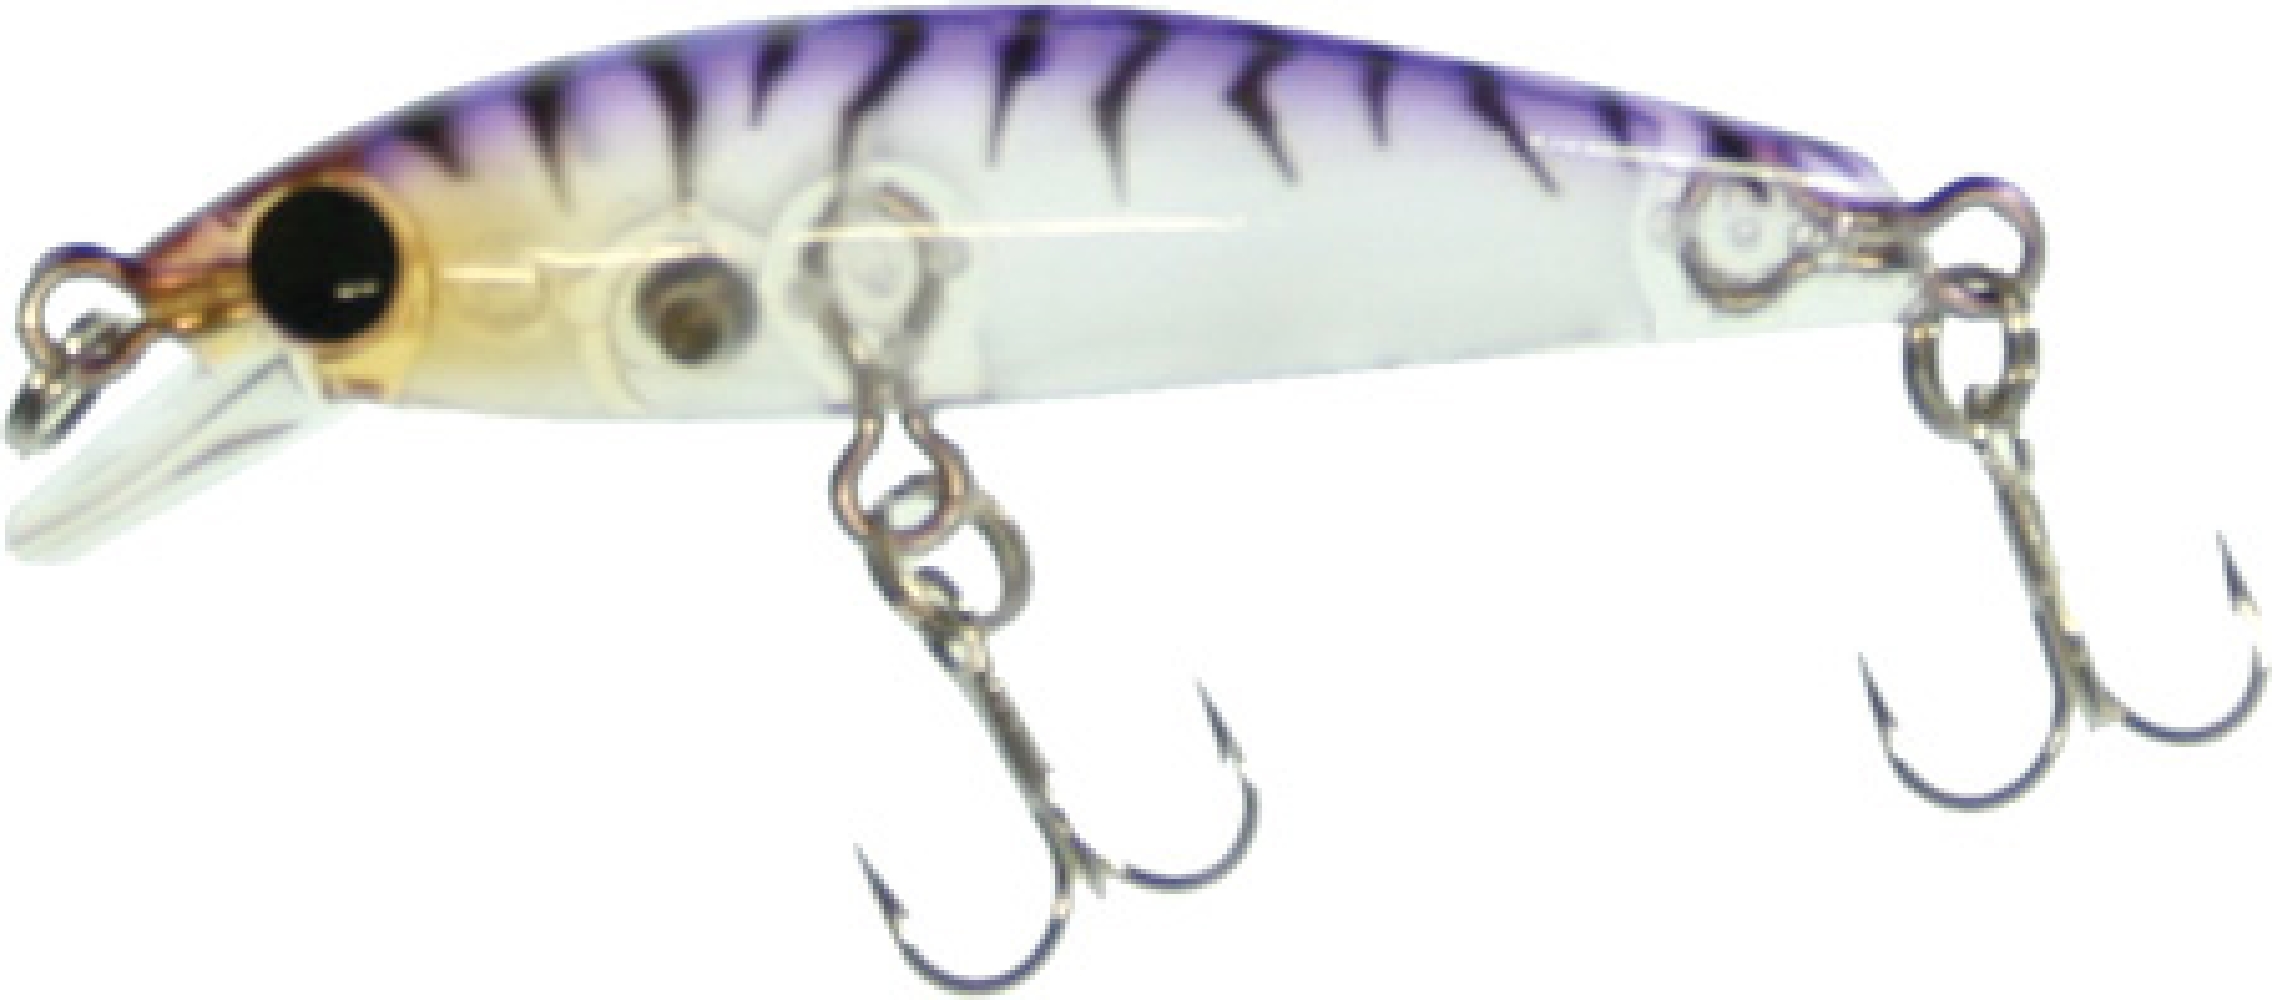 Bassday Sugar Minnow 40S - 40mm Sinking Lure - Compleat Angler Ringwood